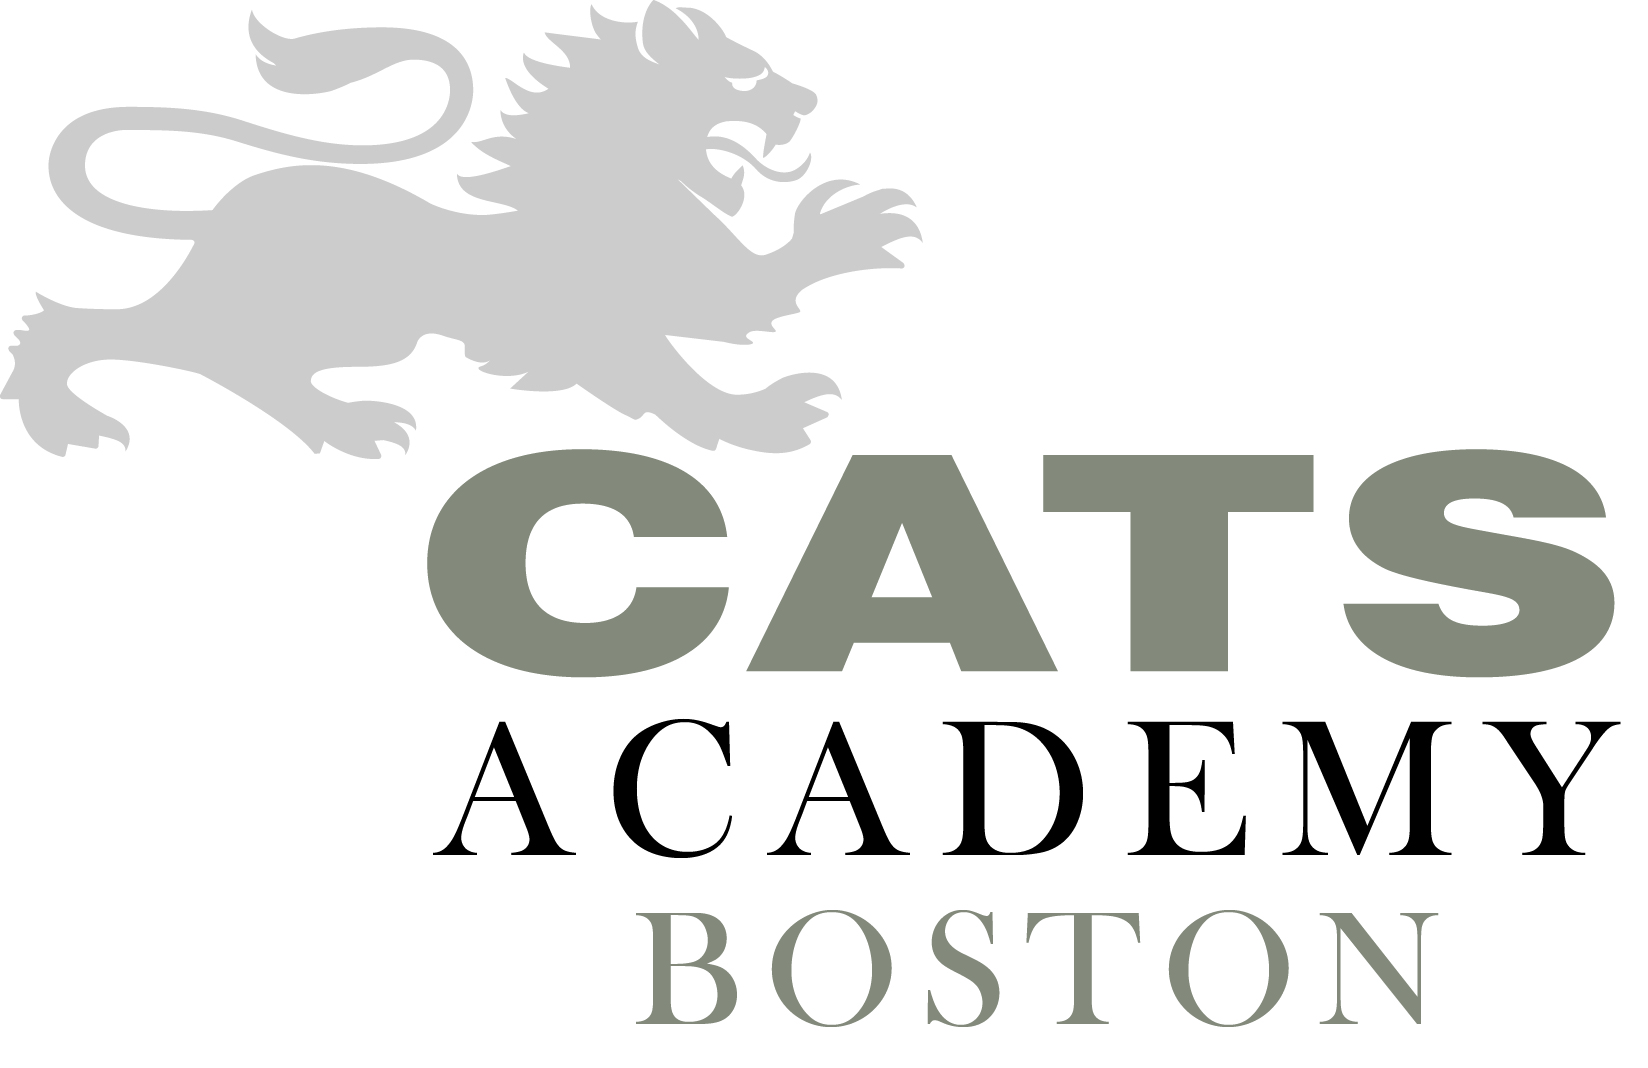 Welcome to the CATS Academy Boston Dorm Blog! – Weekly updates on  Activities, Events, and Life as a Student.